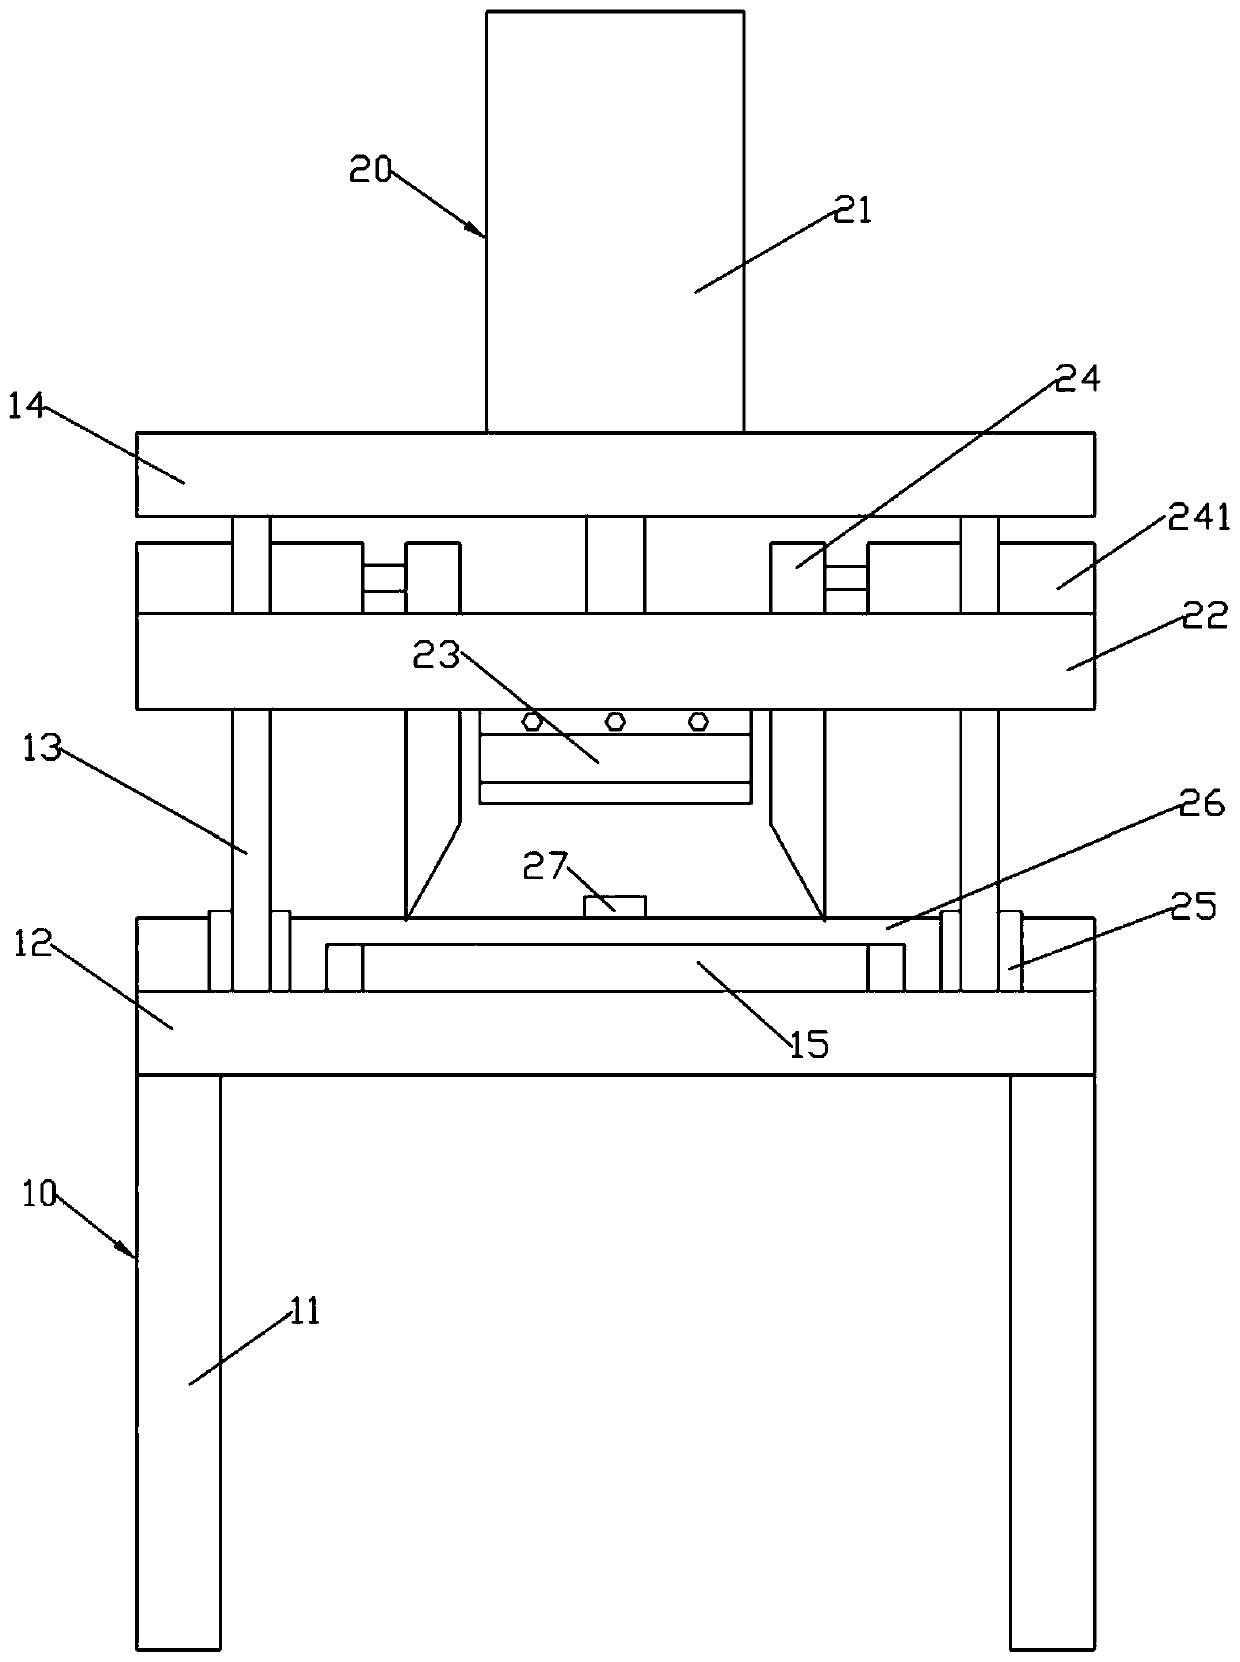 An automatic centering cutting mechanism for wire threading trough plate